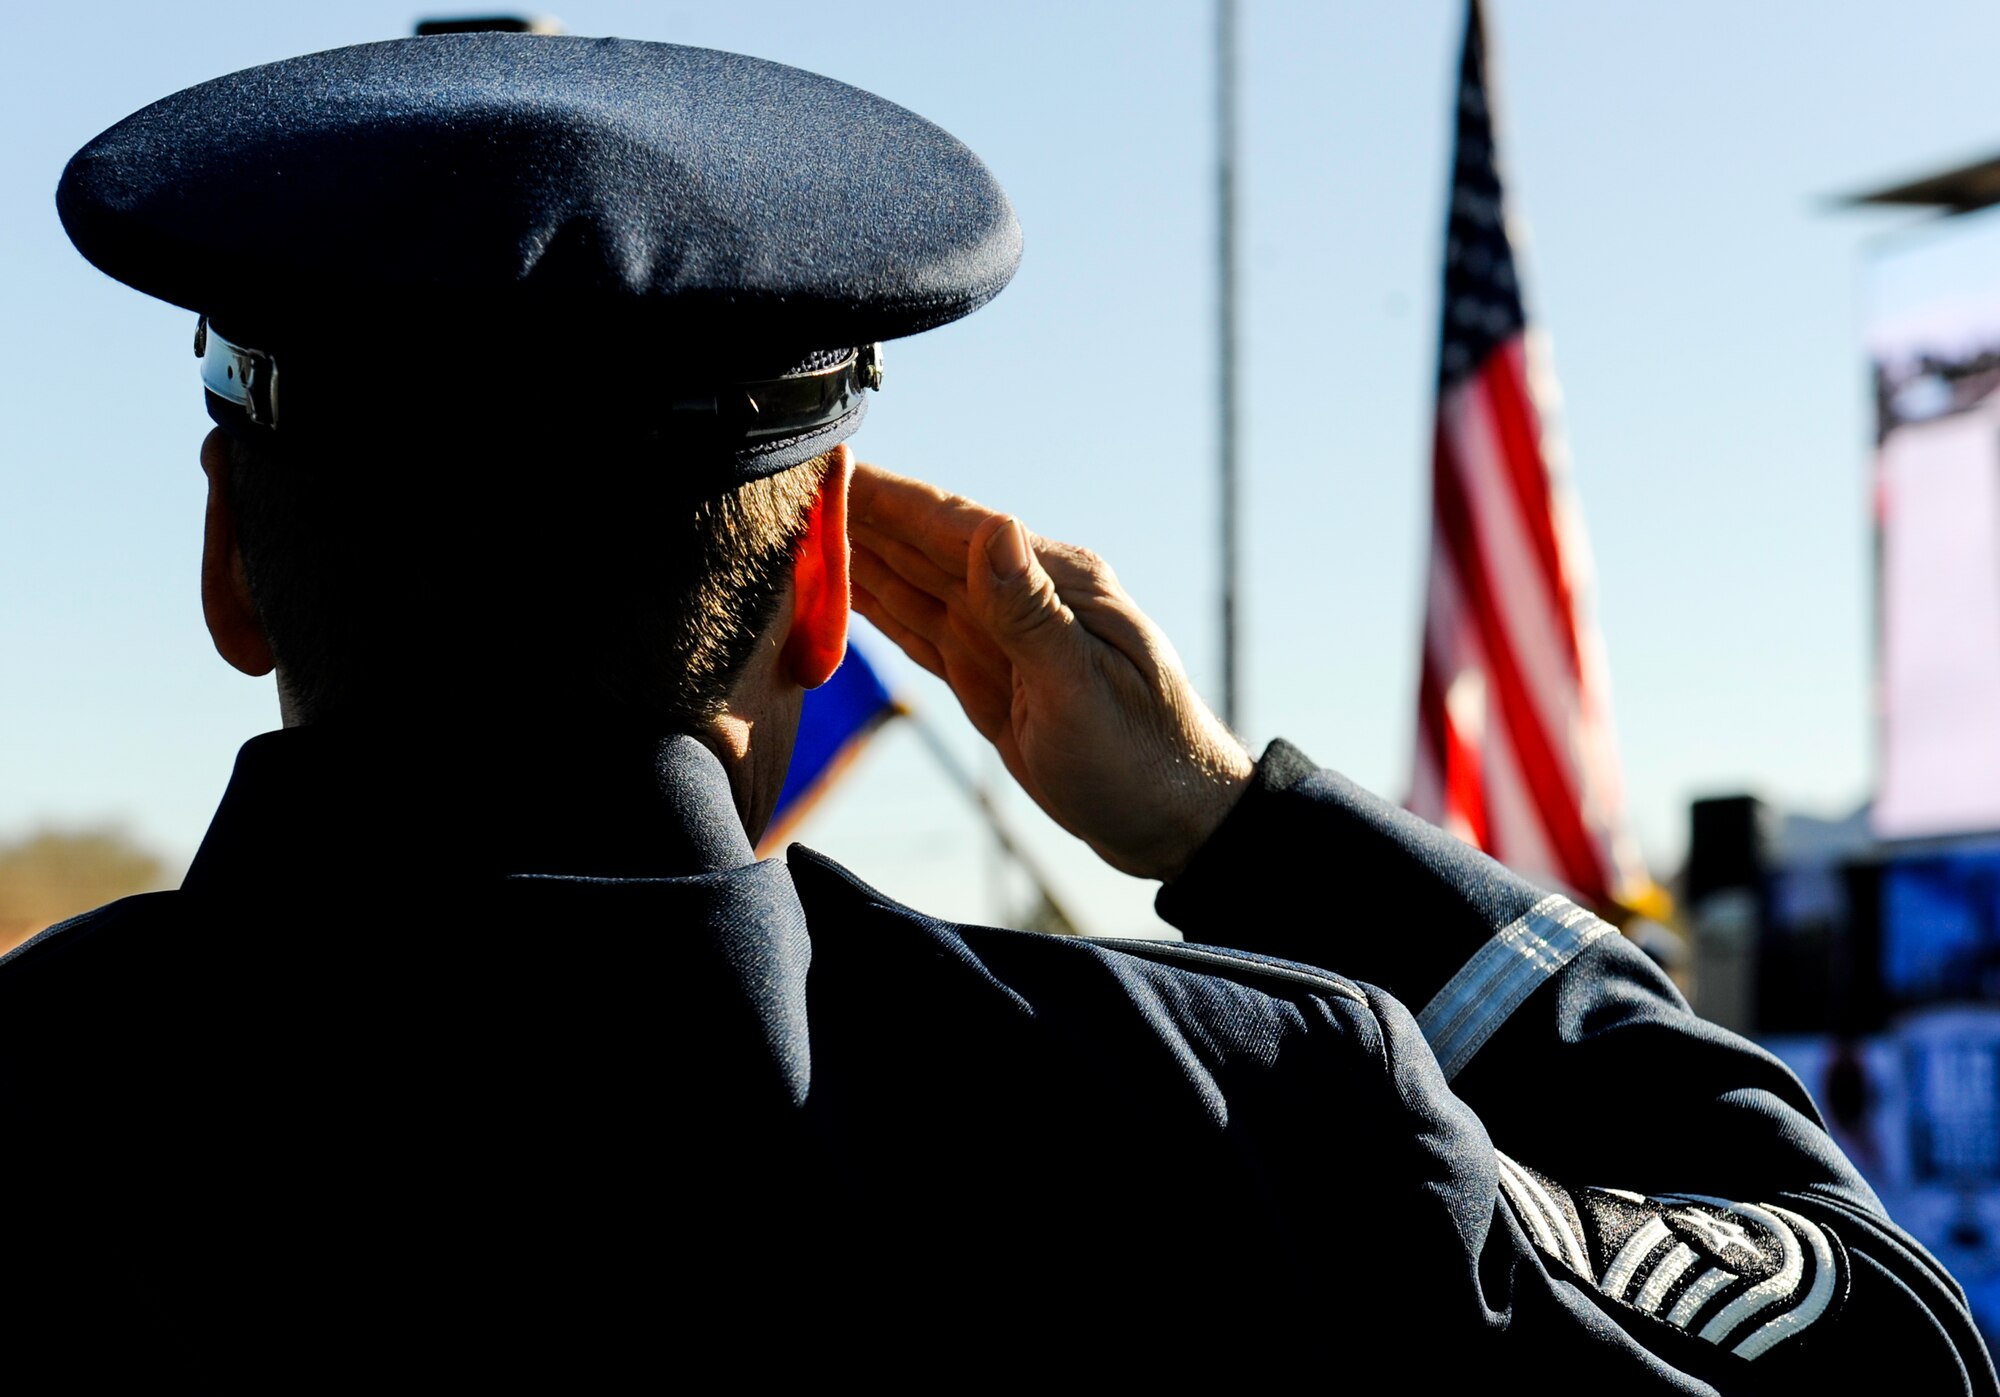 A member of the Air Force Band salutes the American Flag during the playing of the national anthem at the 2017 Air Force Wounded Warrior Trials opening ceremony on Nellis Air Force Base, Nev., Feb. 24, 2017.The Air Force Wounded Warrior Program is a Congressionally-mandated and federally-funded program that provides personalized care, services and advocacy to wounded, ill or injured recovering service members. (U.S. Air Force photo by Airman 1st Class Kevin Tanenbaum/Released)